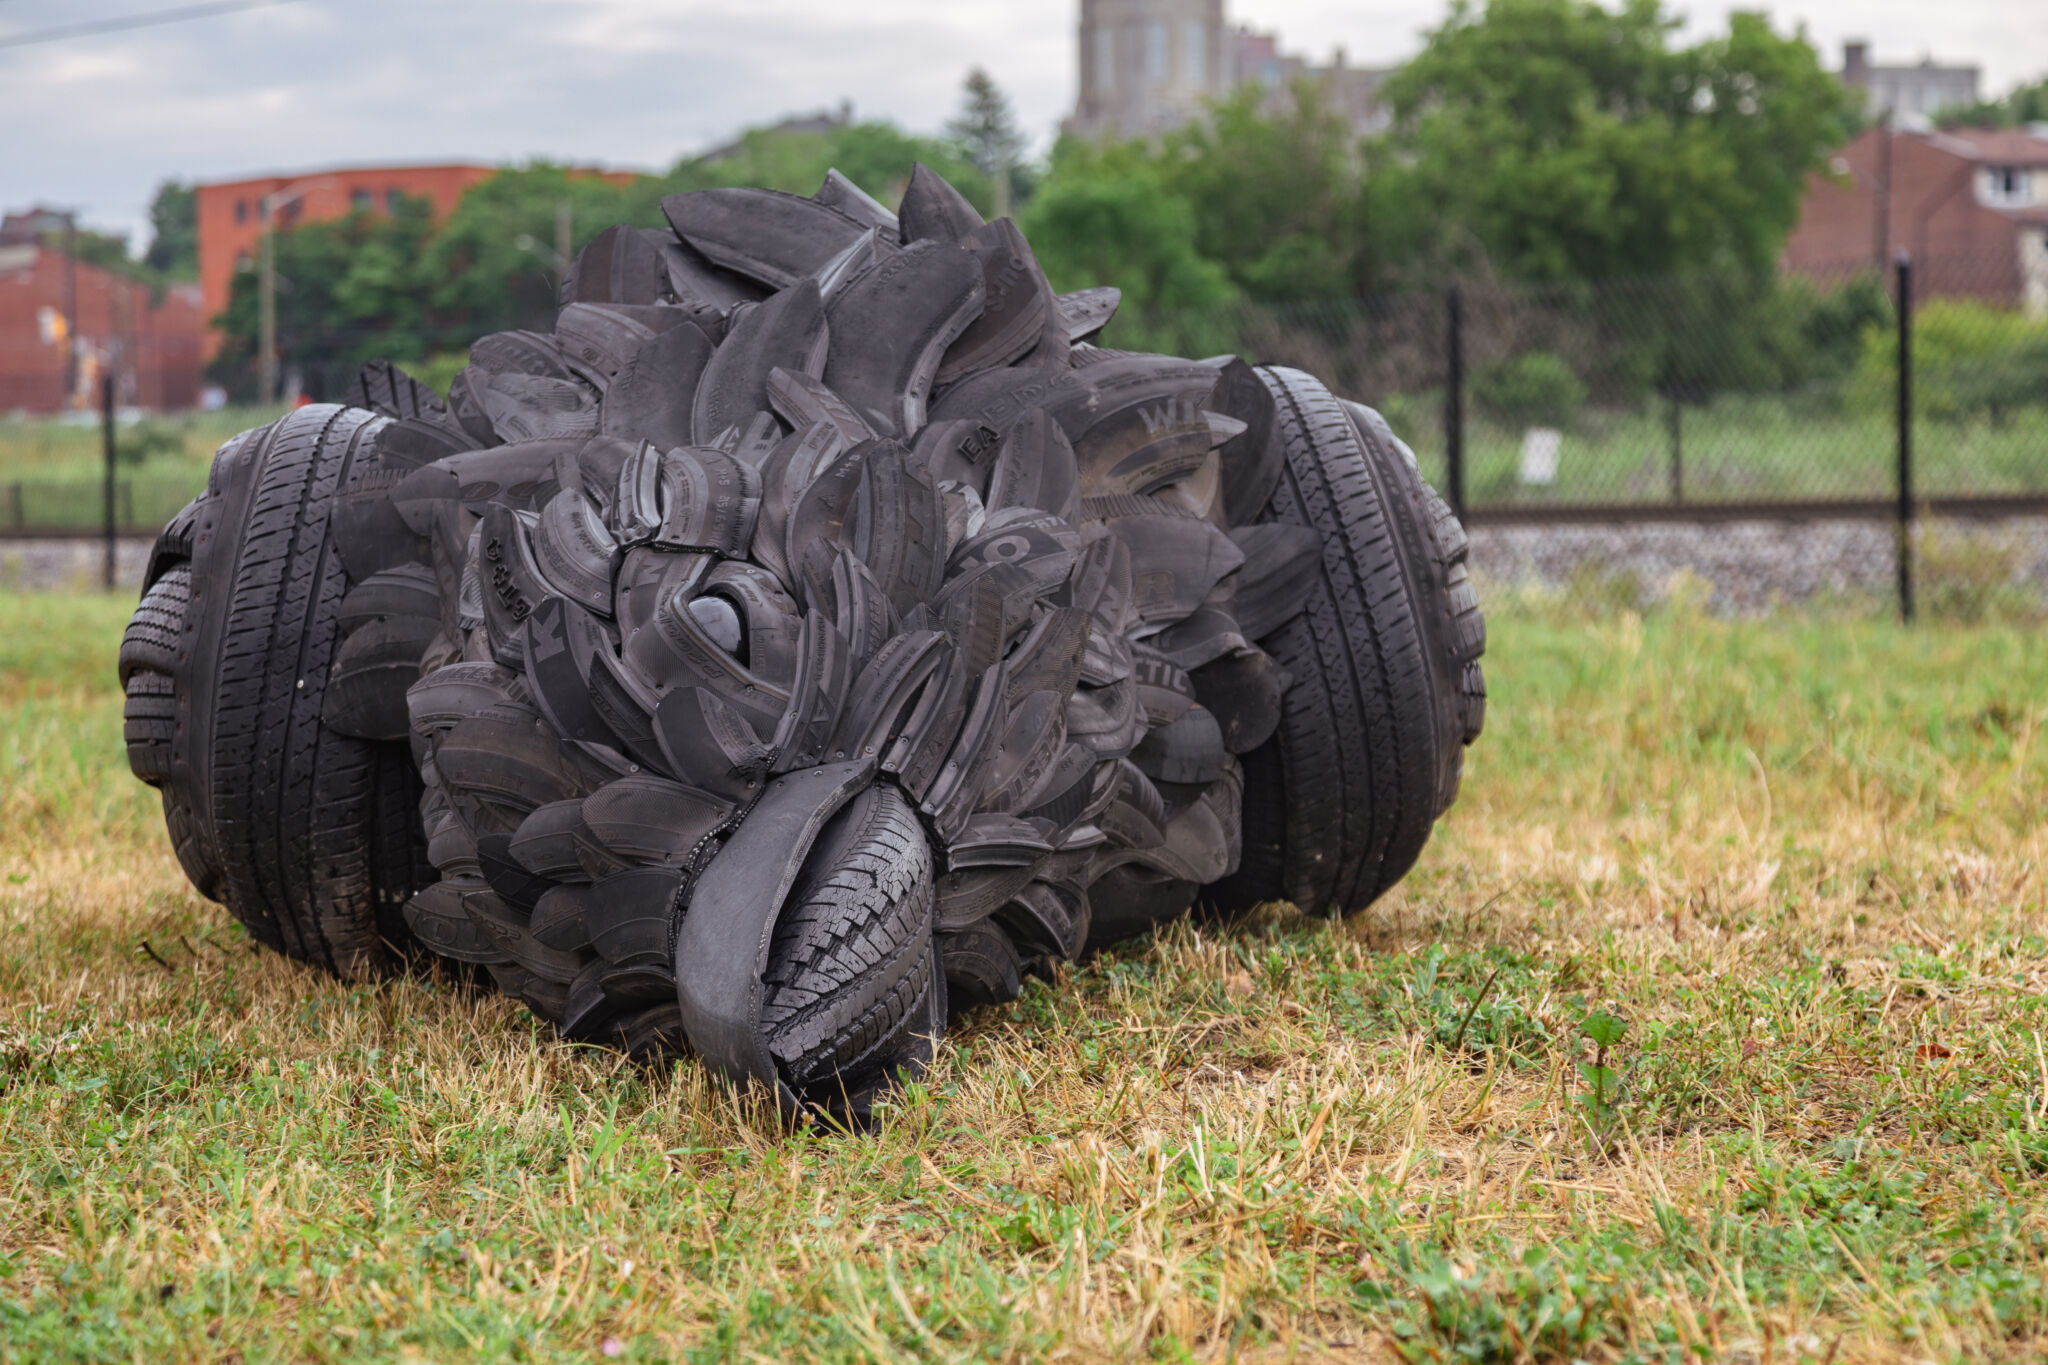 Close-up of the work, featuring the crow’s head, made of recycled tires.